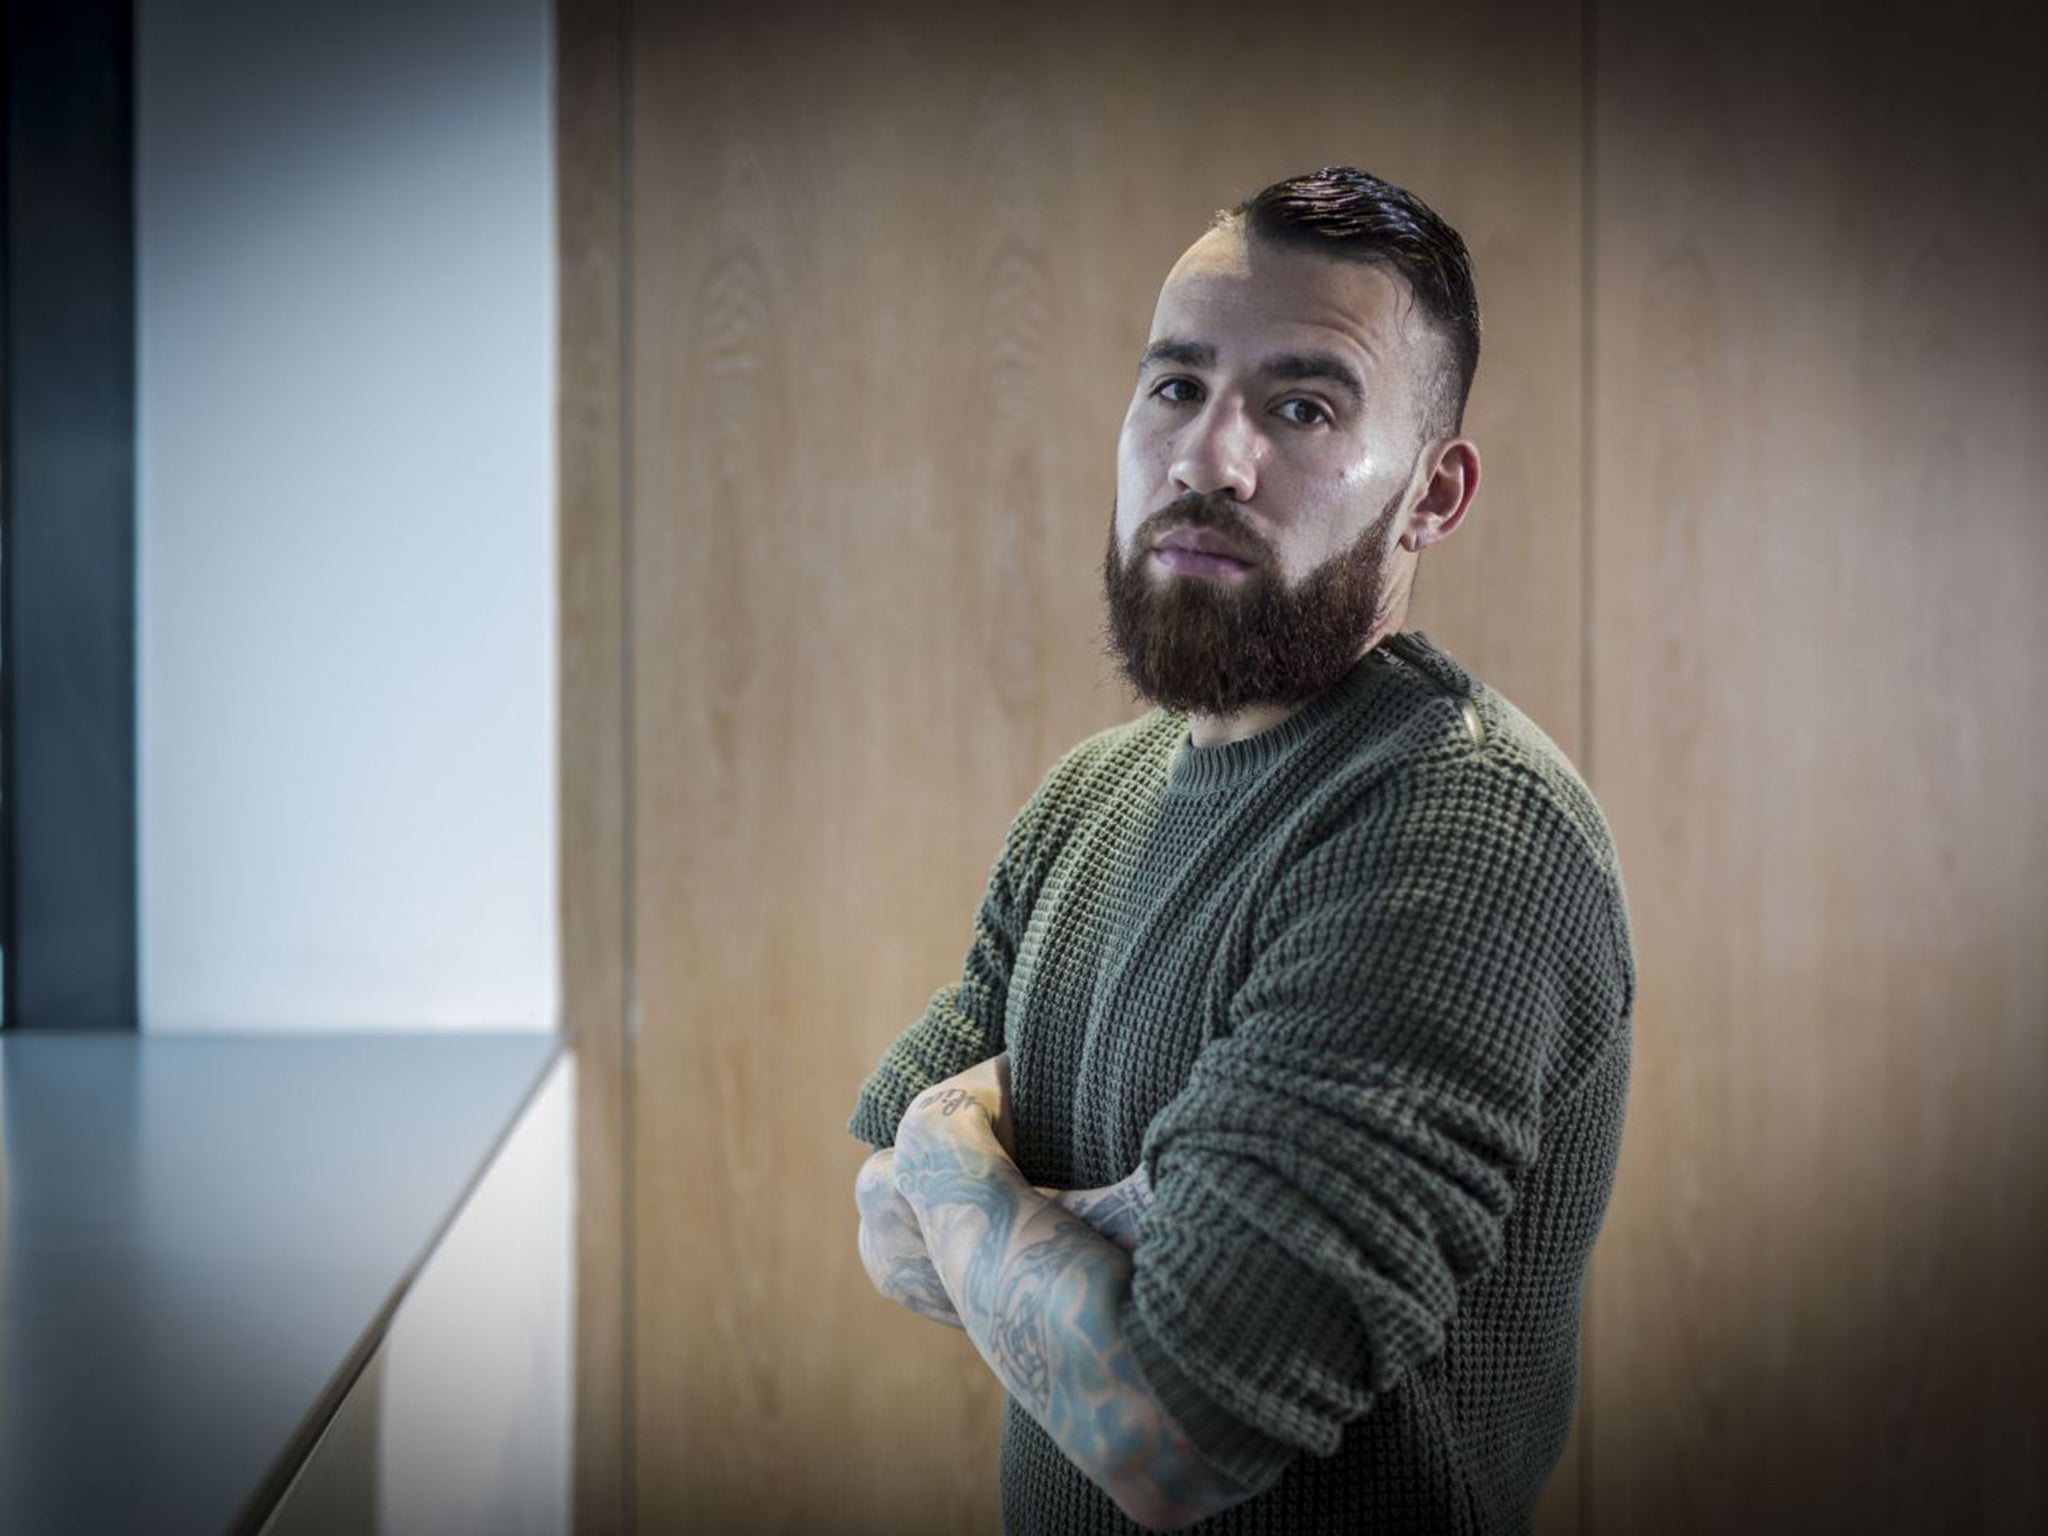 Otamendi thinks his beard and tattoos are a ‘big part of my personality’